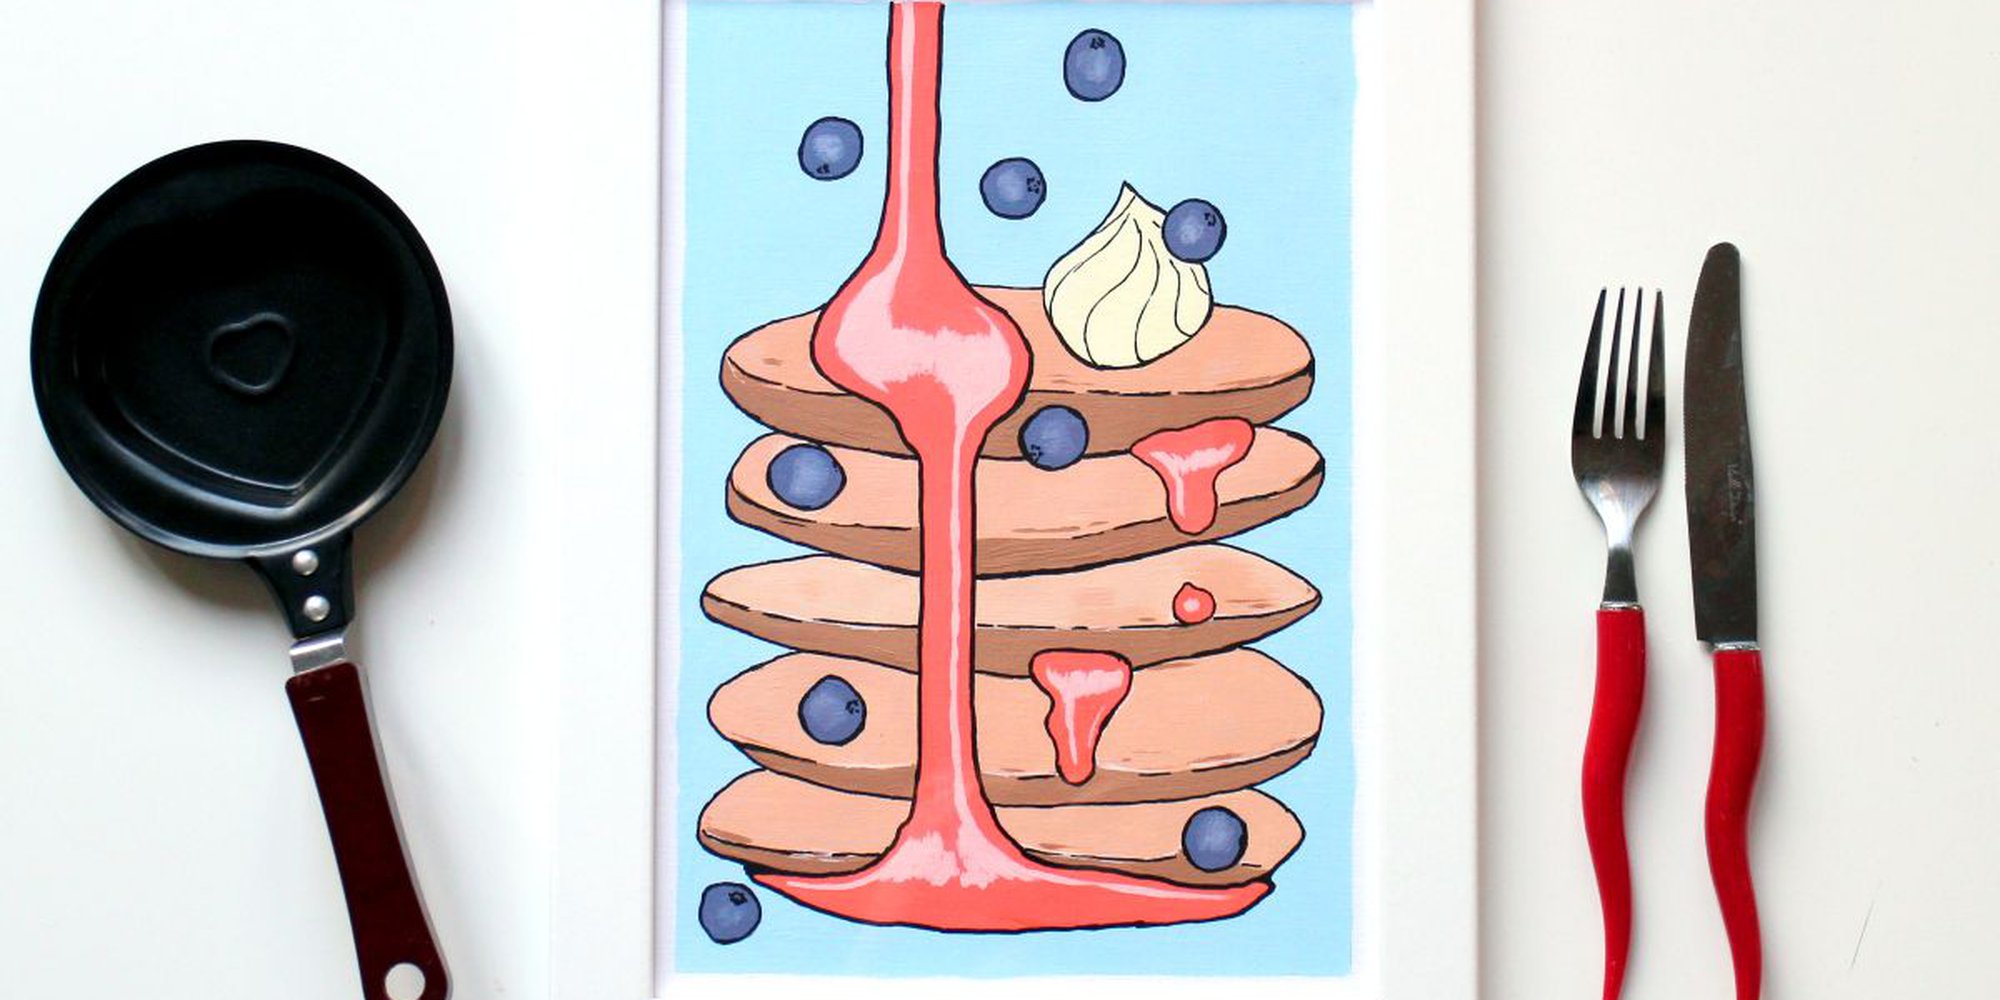 Art of the Day: "Pancake Tower Pop Art Painting On A4 Paper Unframed, 2017" by Ian Viggars